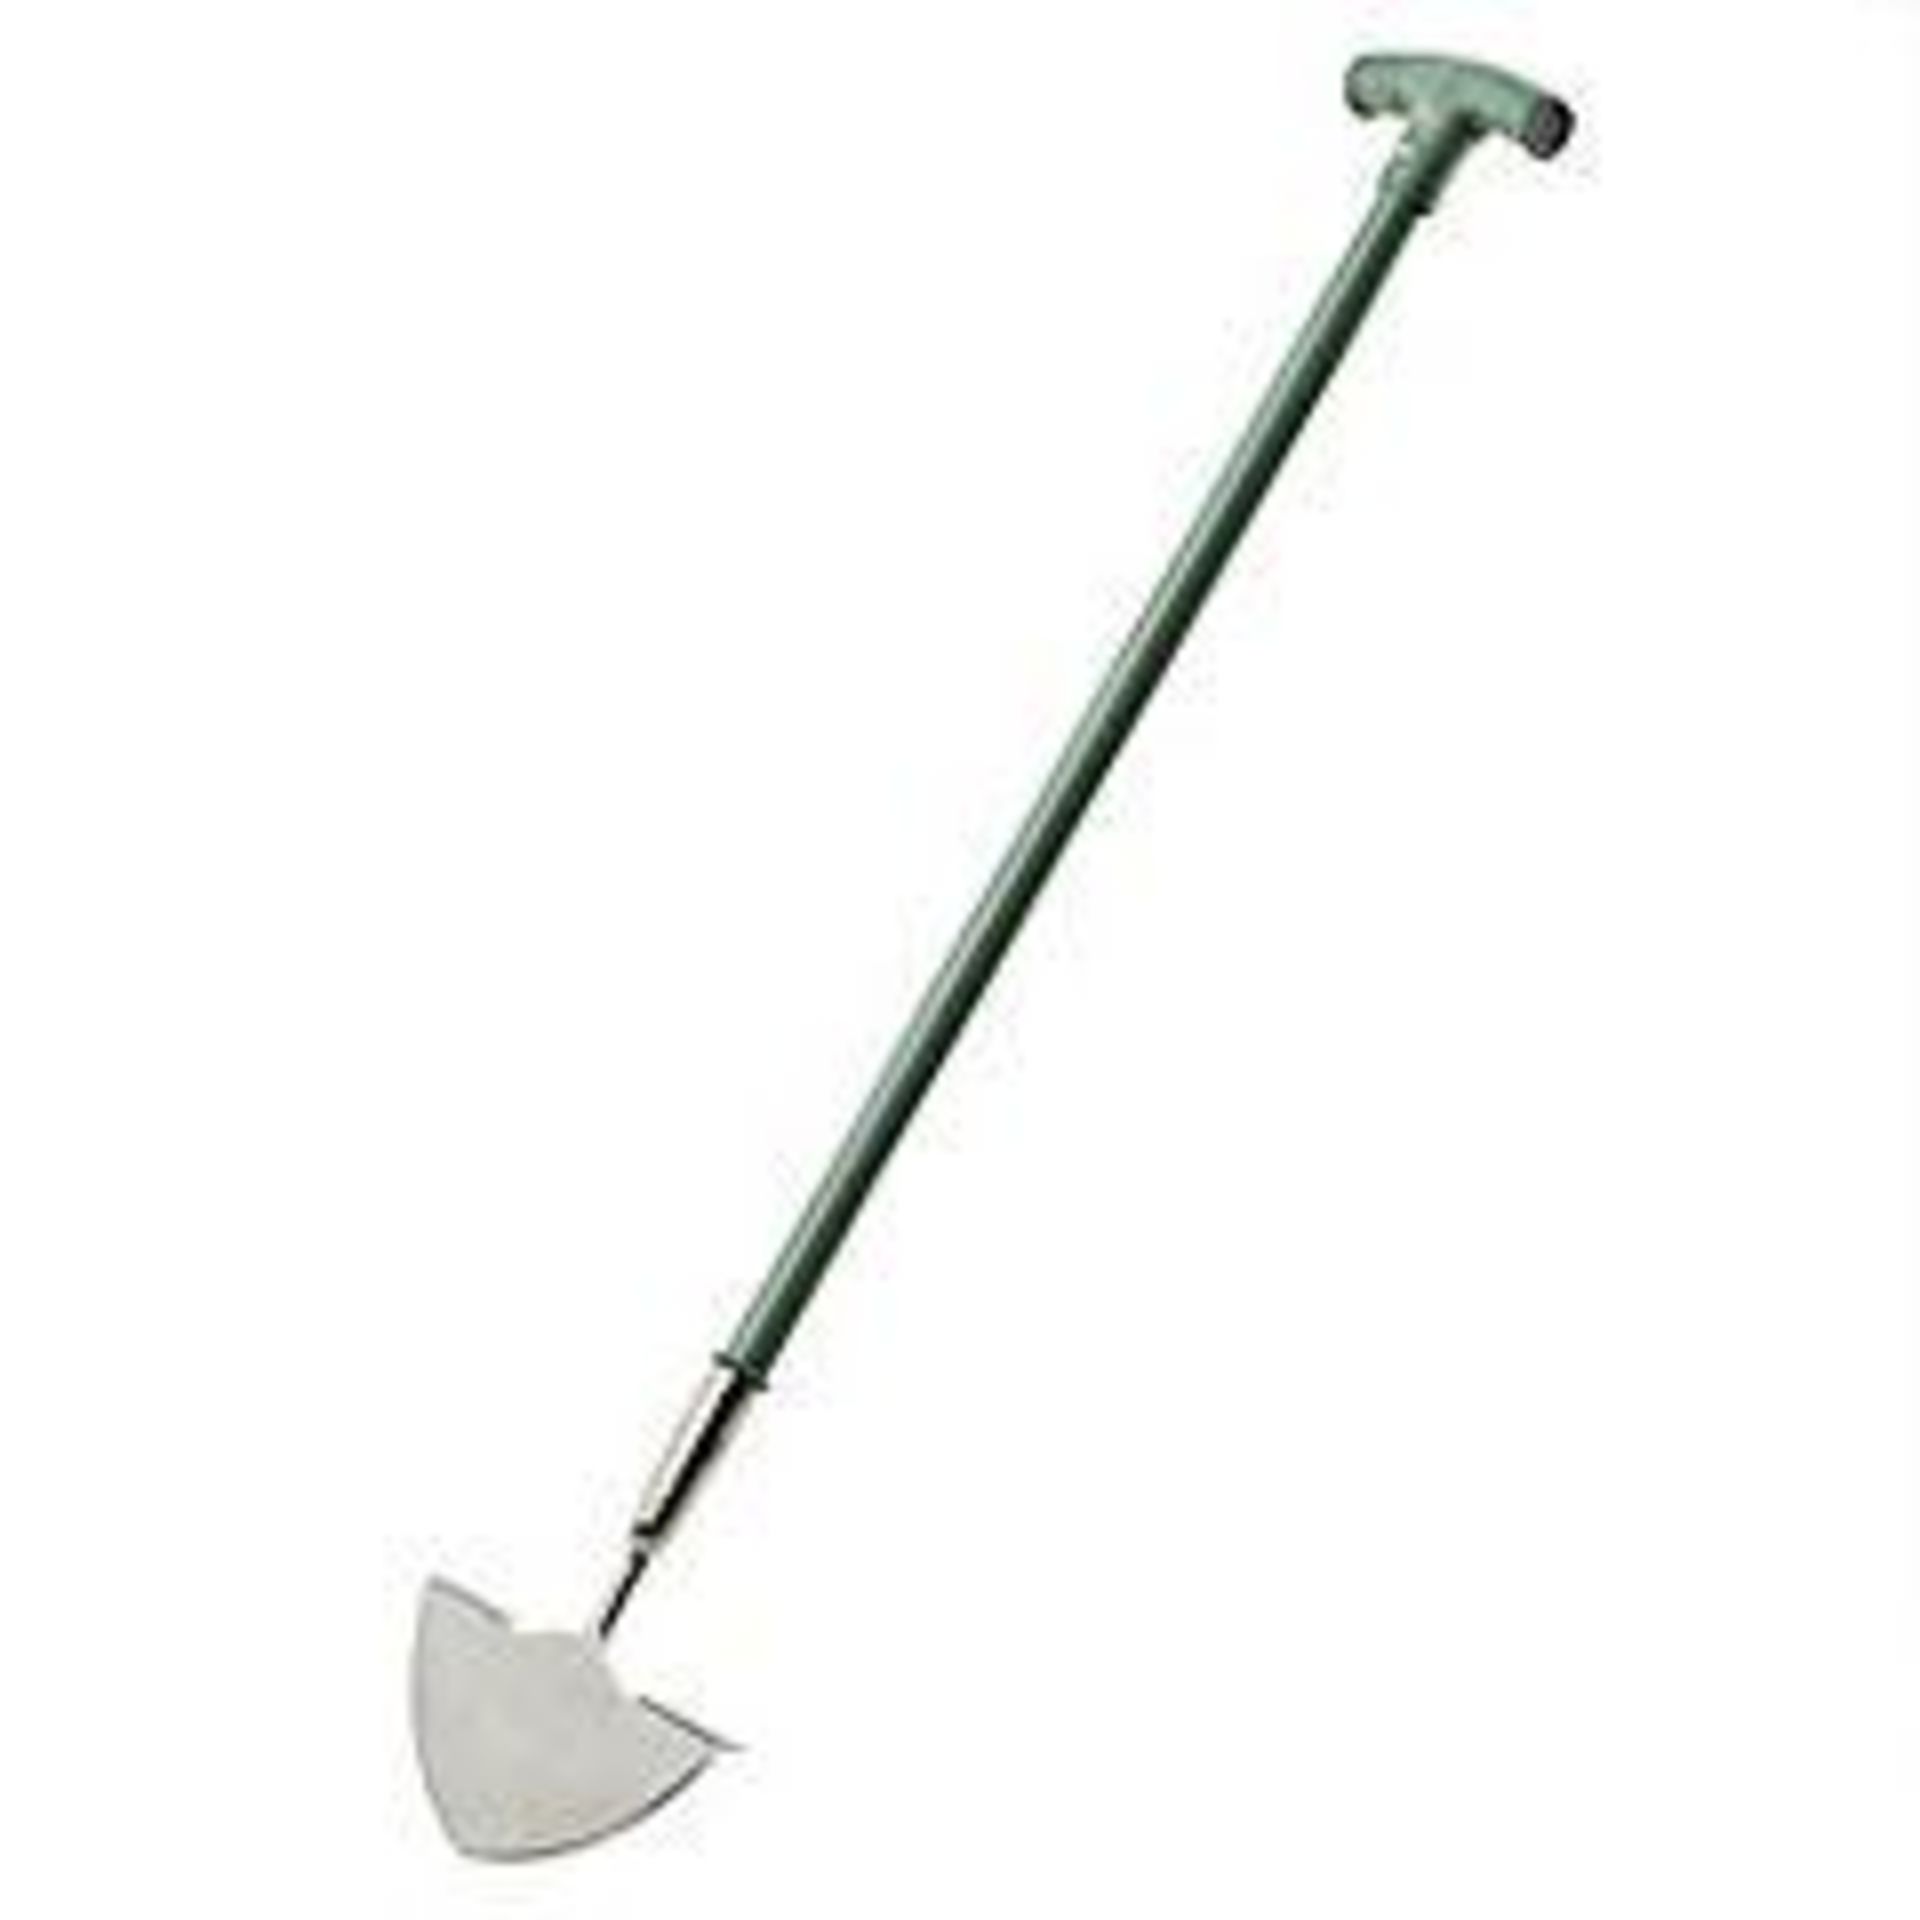 V Brand New Long Handled Stainless Steel Lawn Edger X 2 YOUR BID PRICE TO BE MULTIPLIED BY TWO